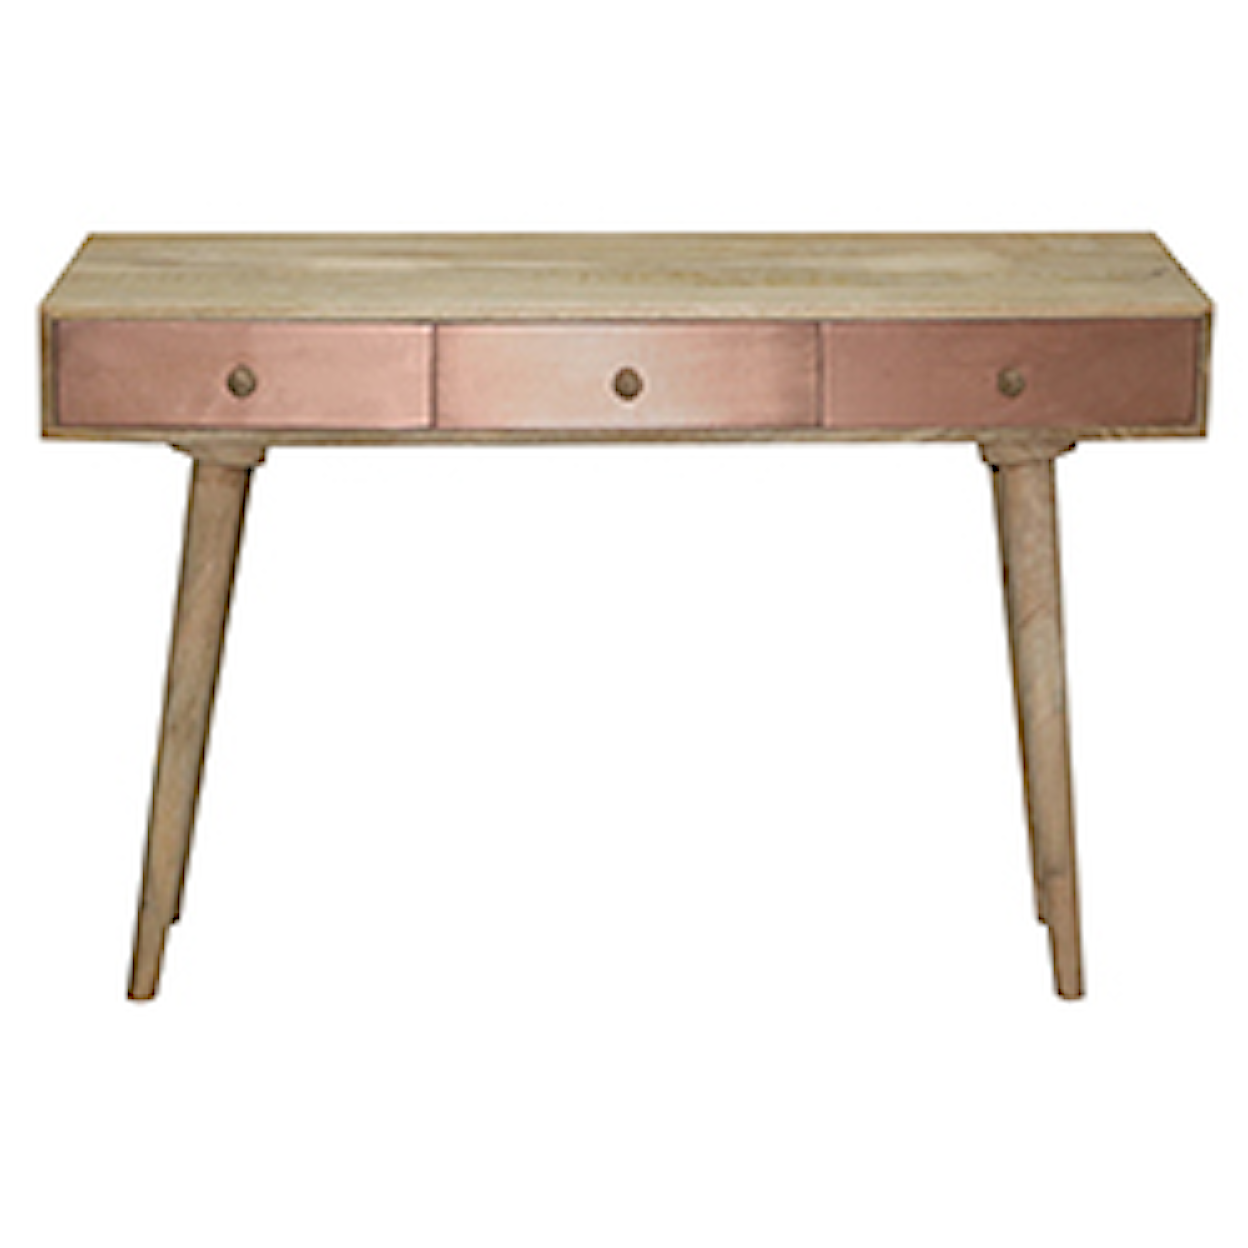 Carolina Chairs Outbound Console Table